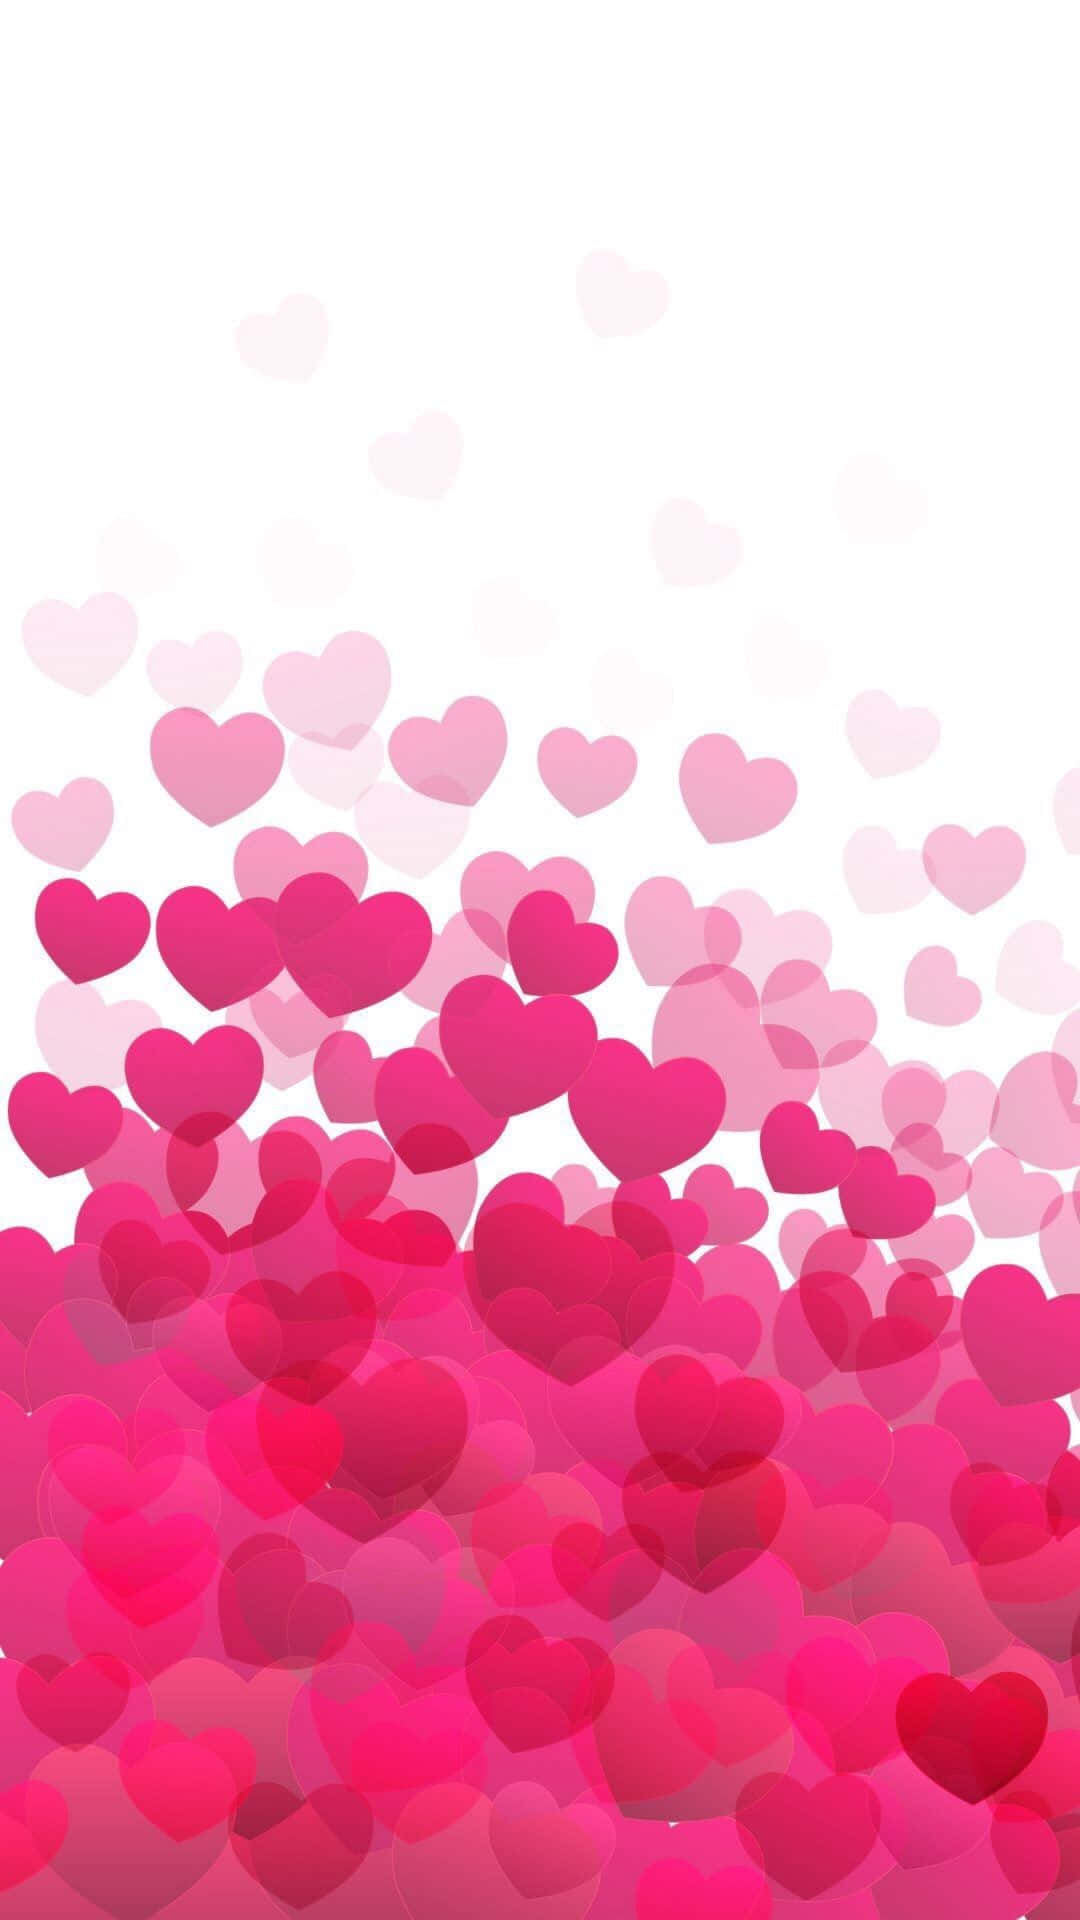 Download A Tender Moment of Pink Love Wallpaper